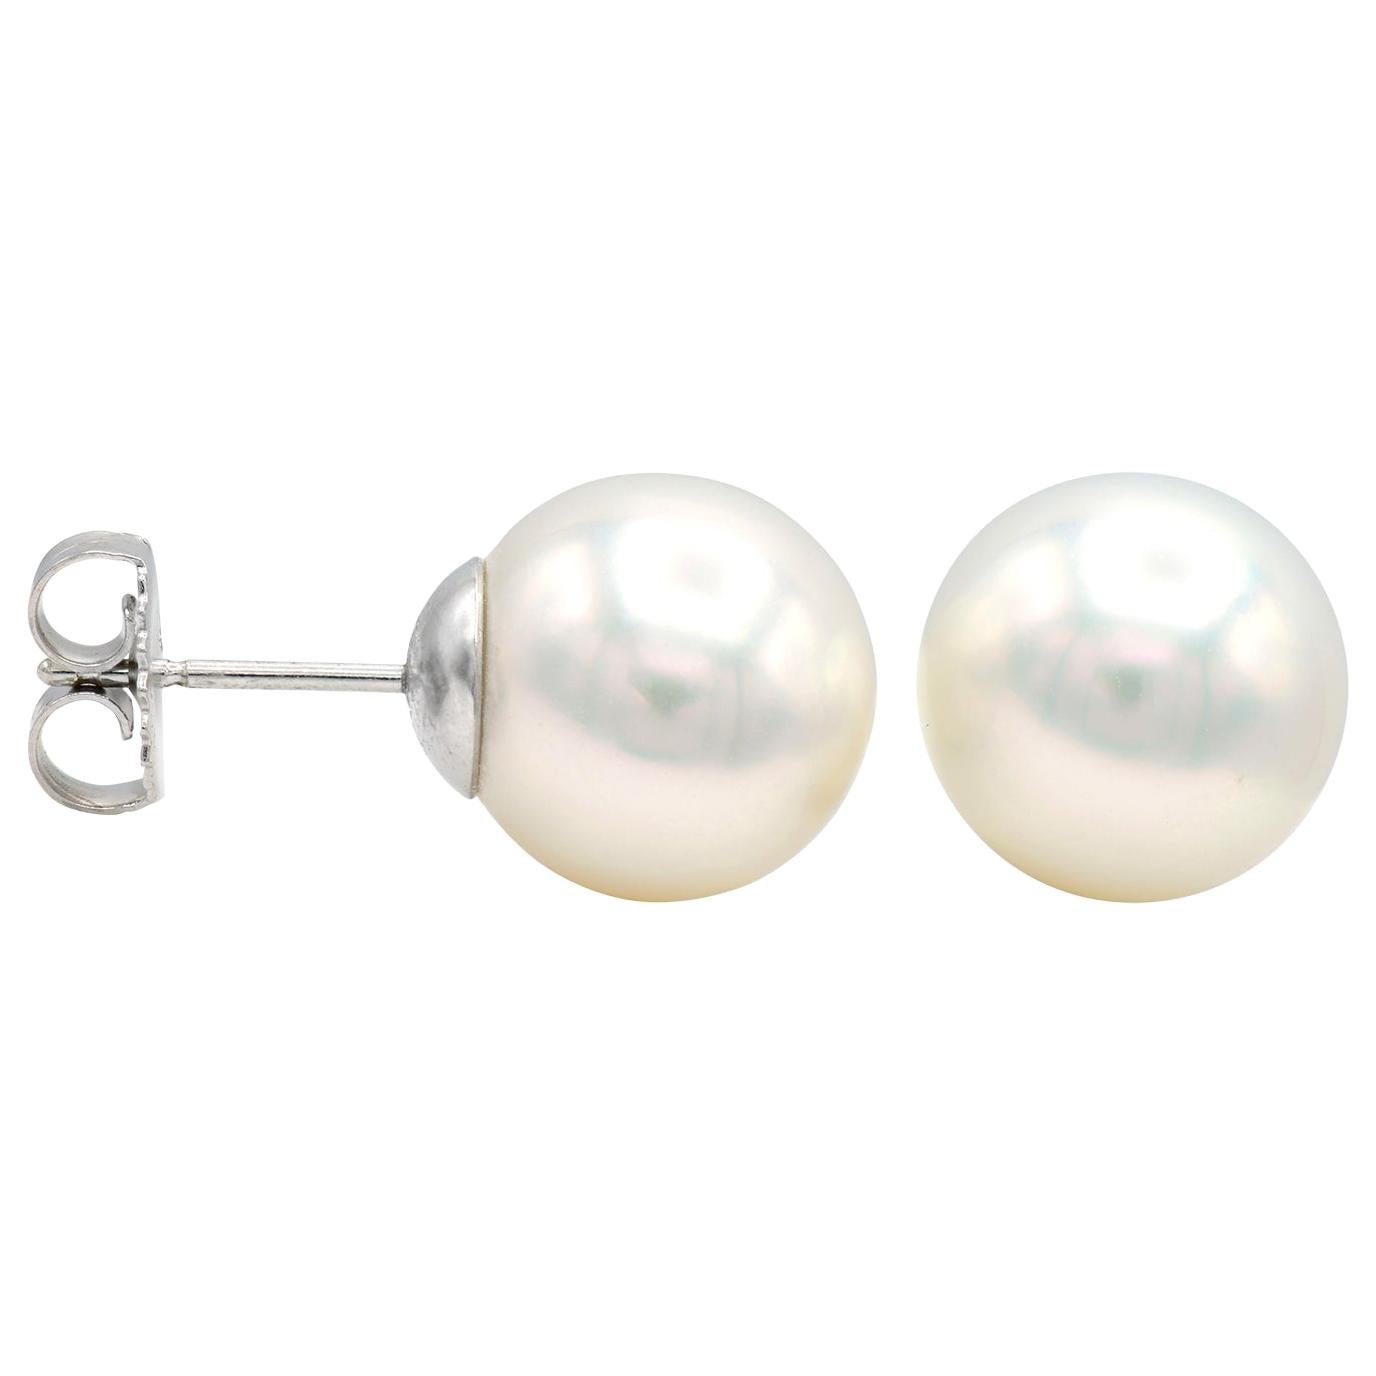 9-9.5mm South Sea Pearl Stud Earrings with 14 Karat White Gold Post and Backs